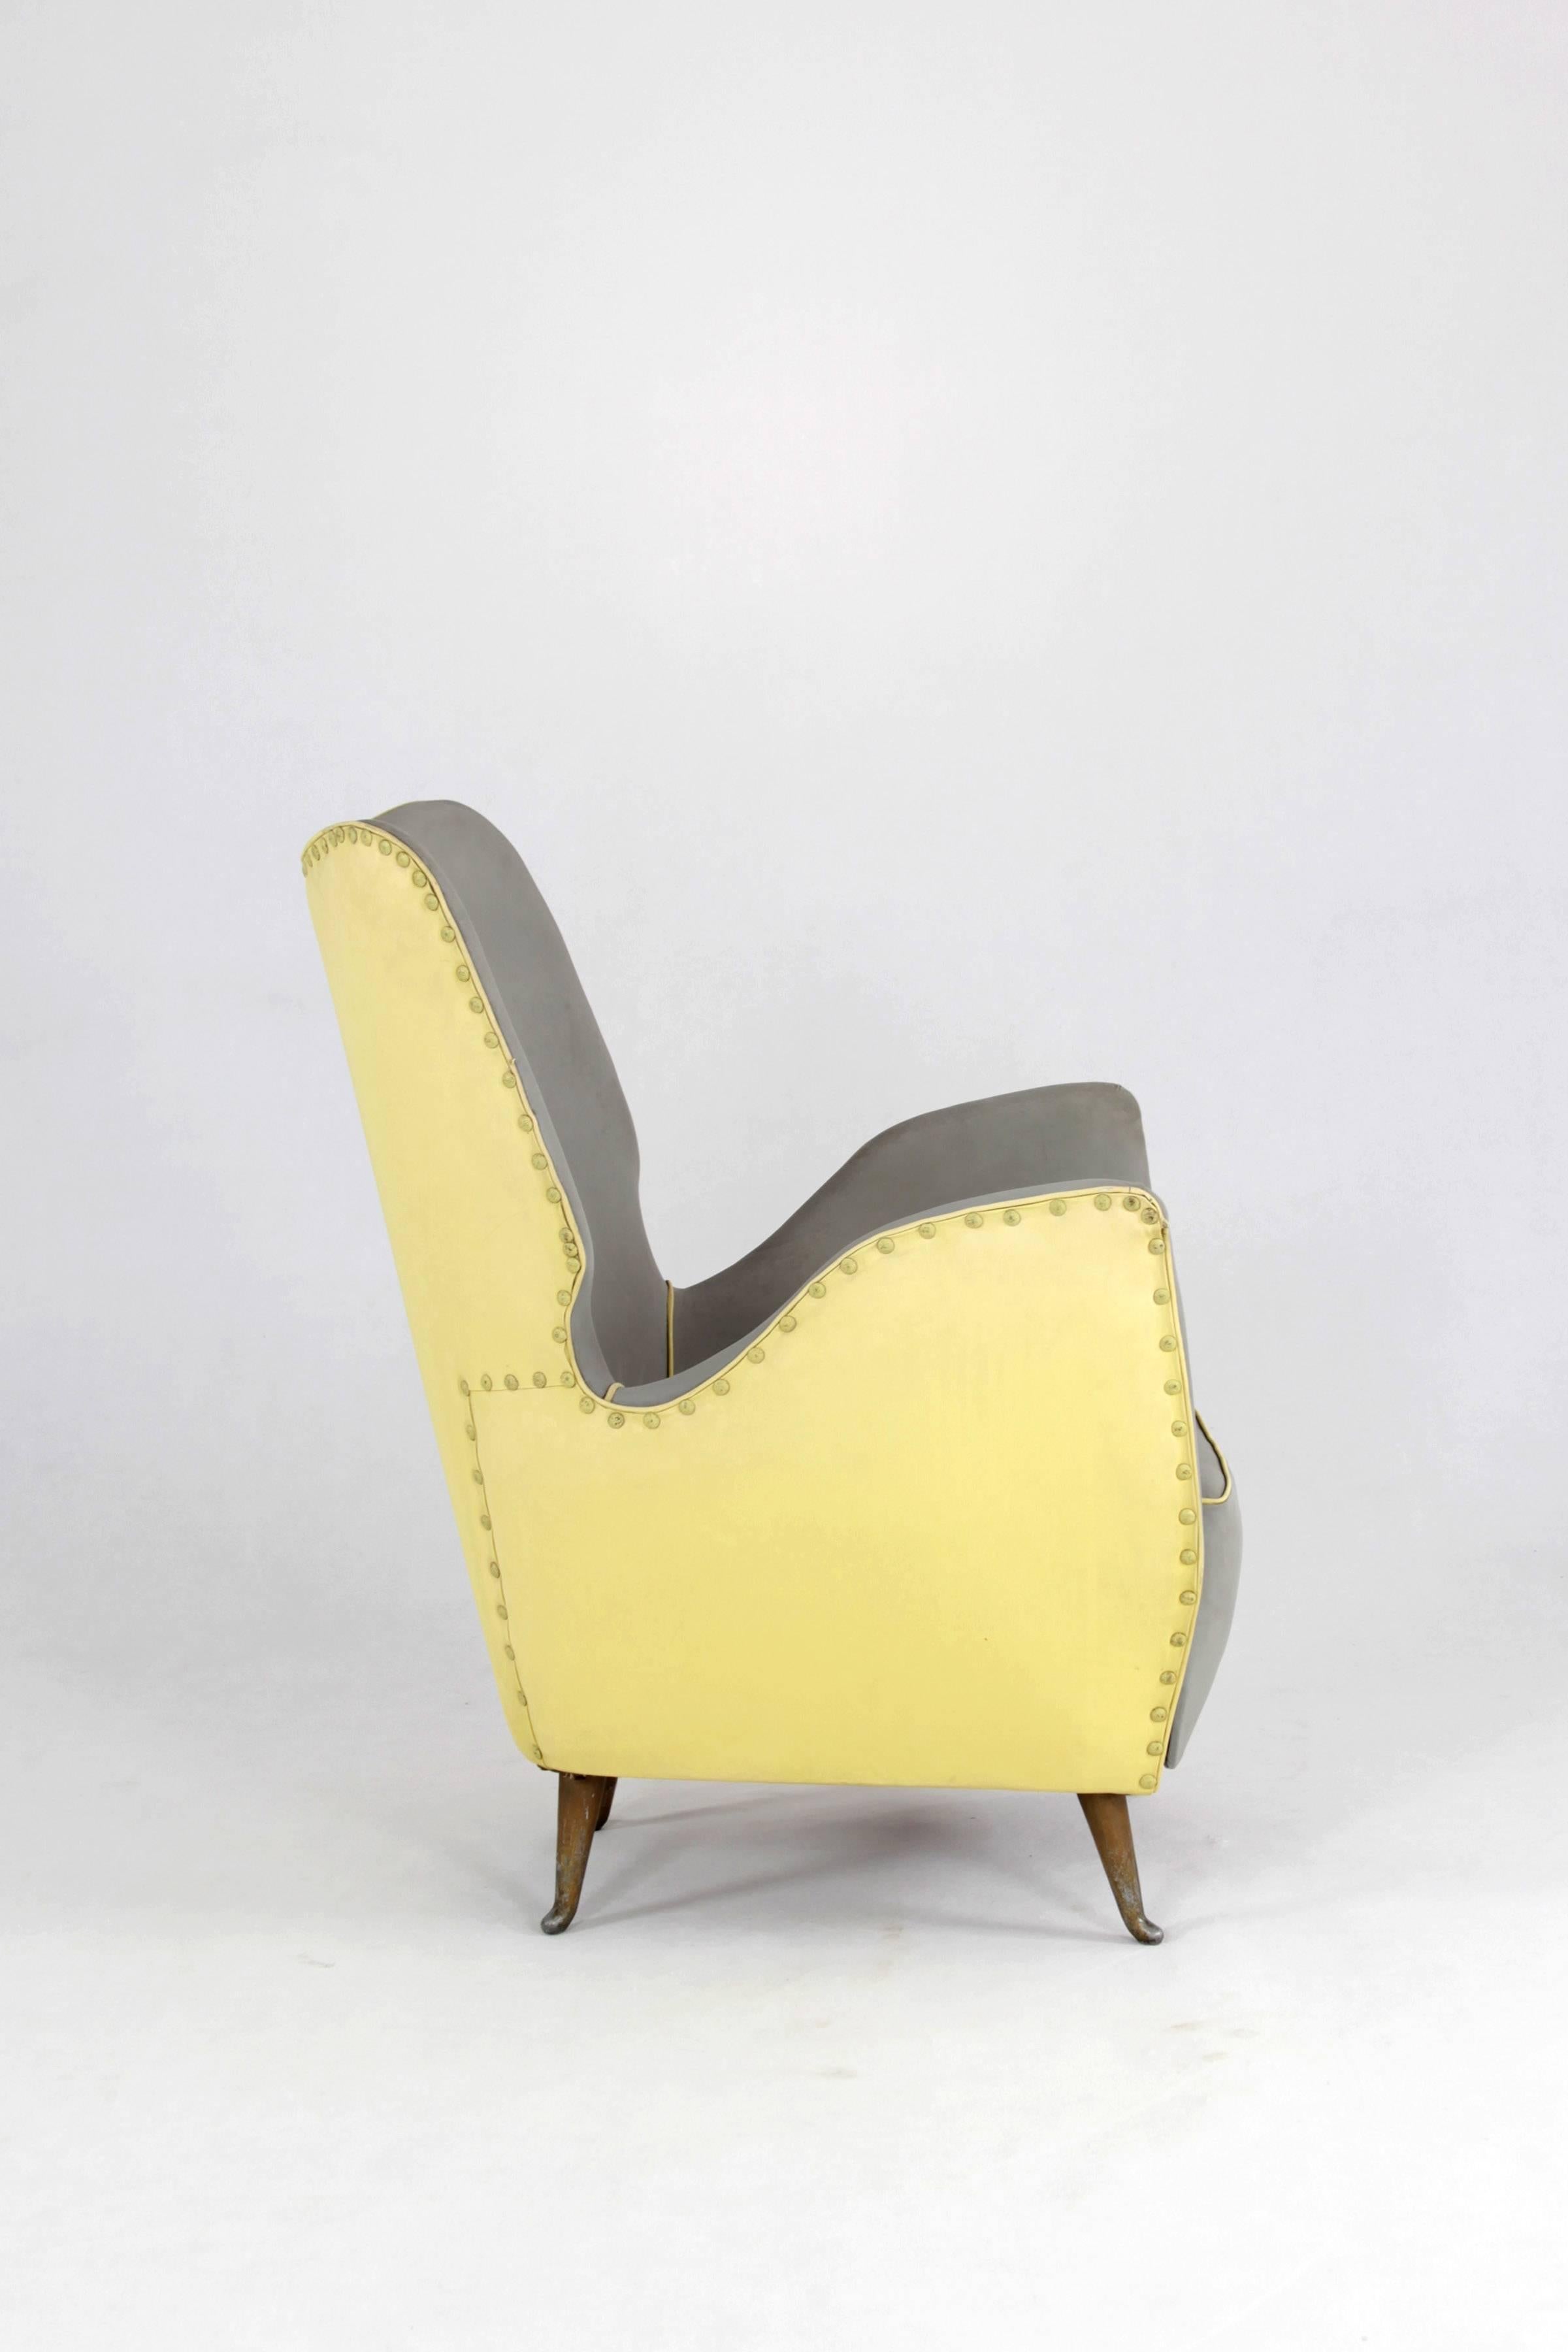 Cast Chairs with Two-Tone Cover, Manufactured by I.S.A. Bergamo, 1950s For Sale